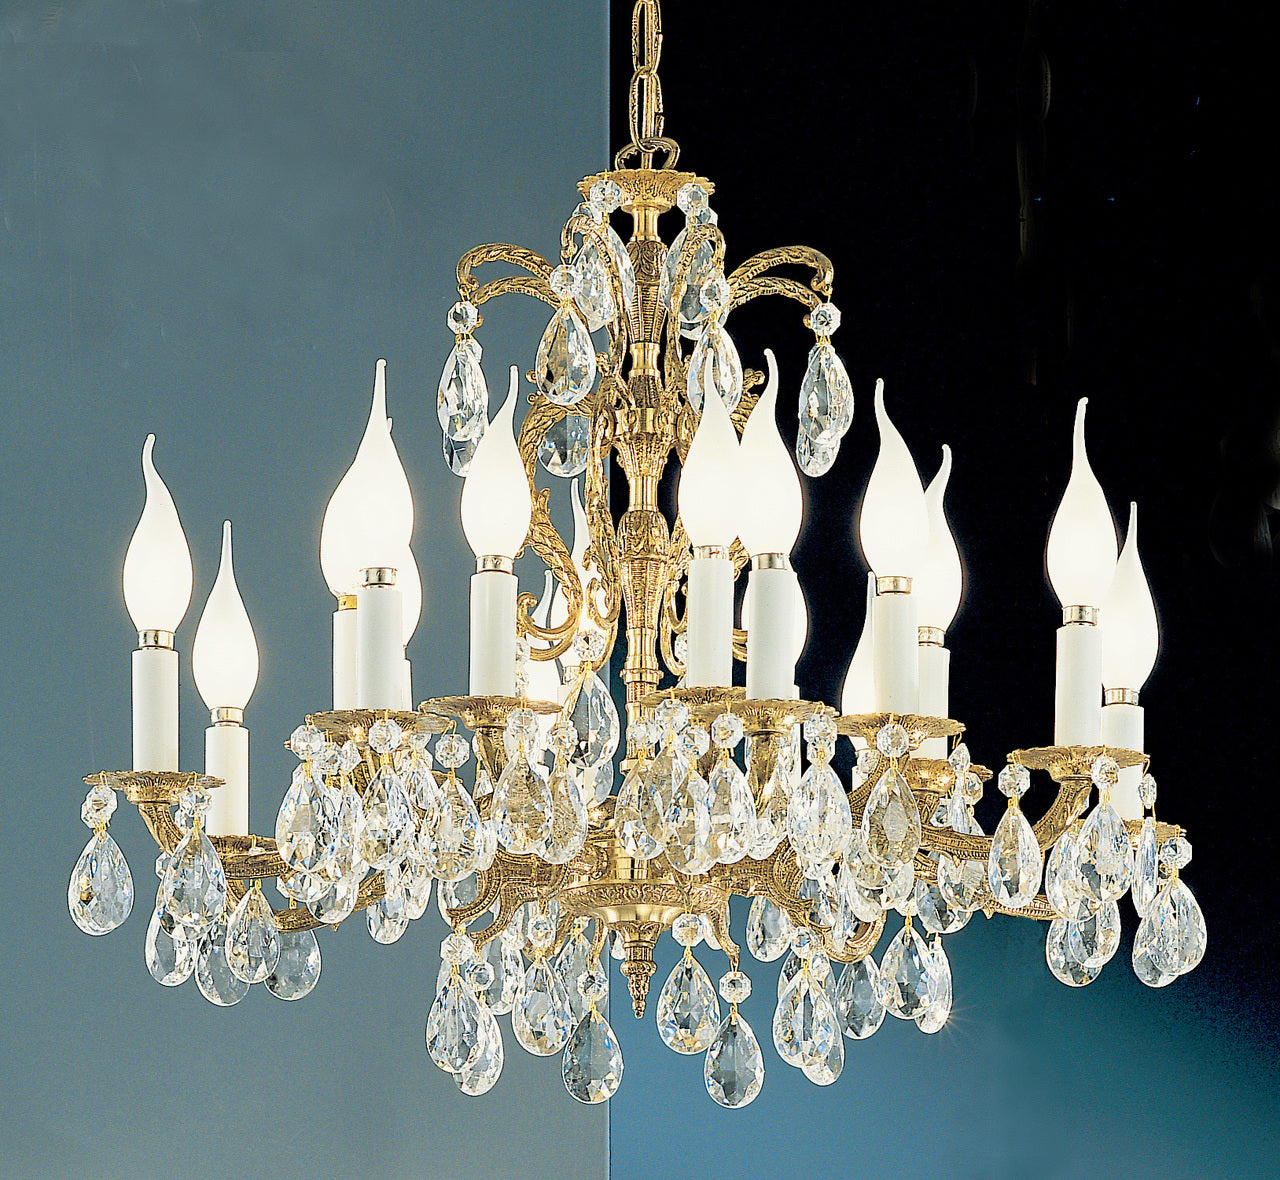 Classic Lighting 5216 OWB C Barcelona Crystal/Cast Brass Chandelier in Olde World Bronze (Imported from Spain)